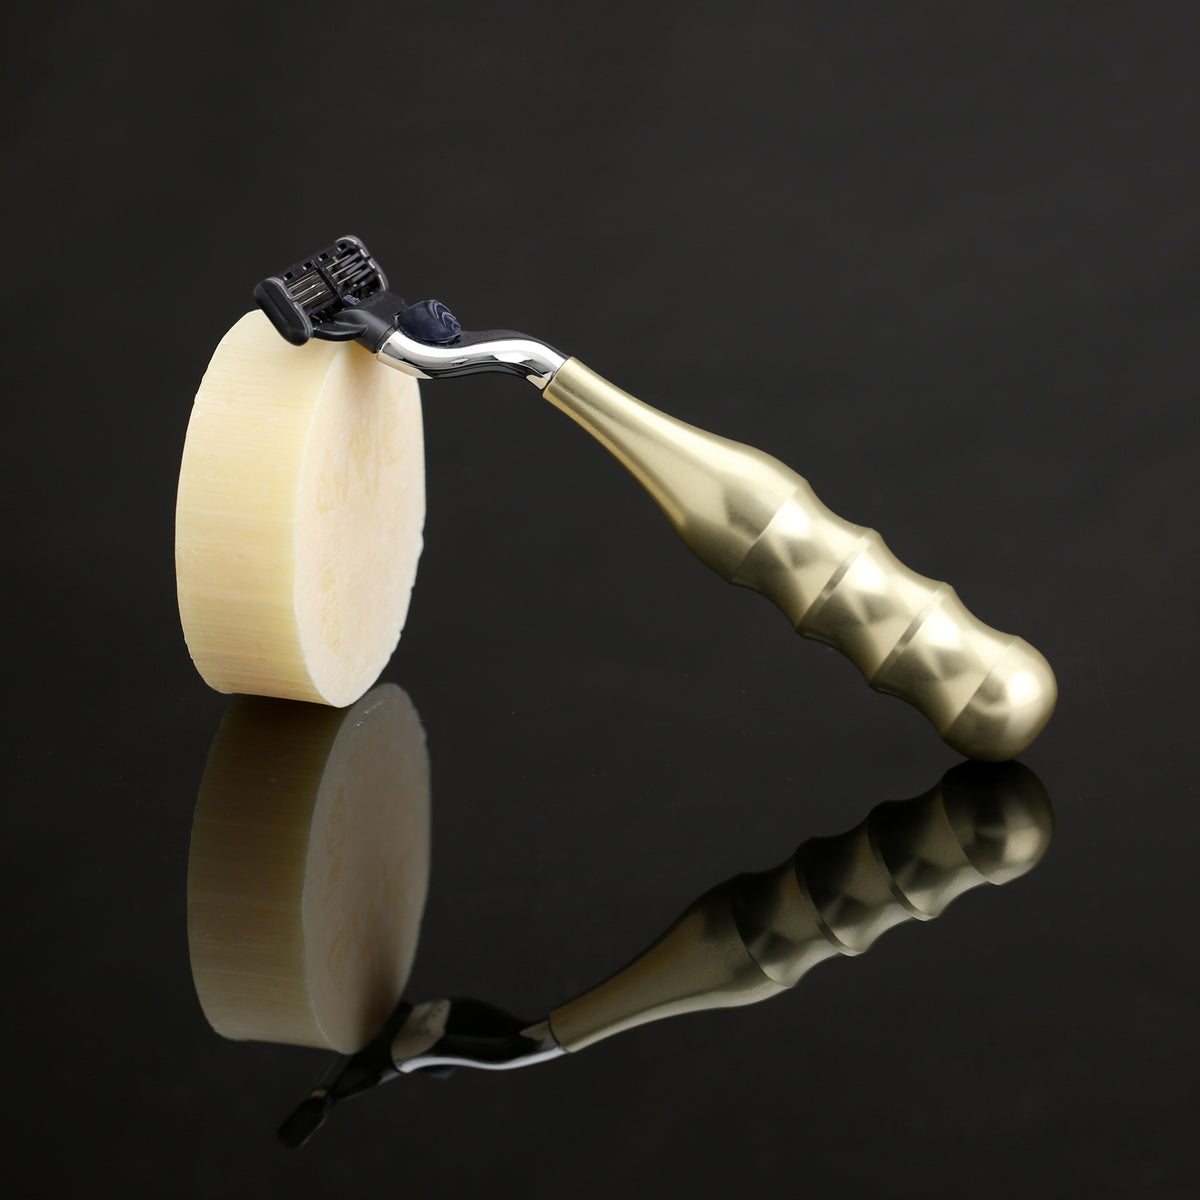 The Champagne-coloured mach3 Merker razor with a puck of shave soap on a black reflective background